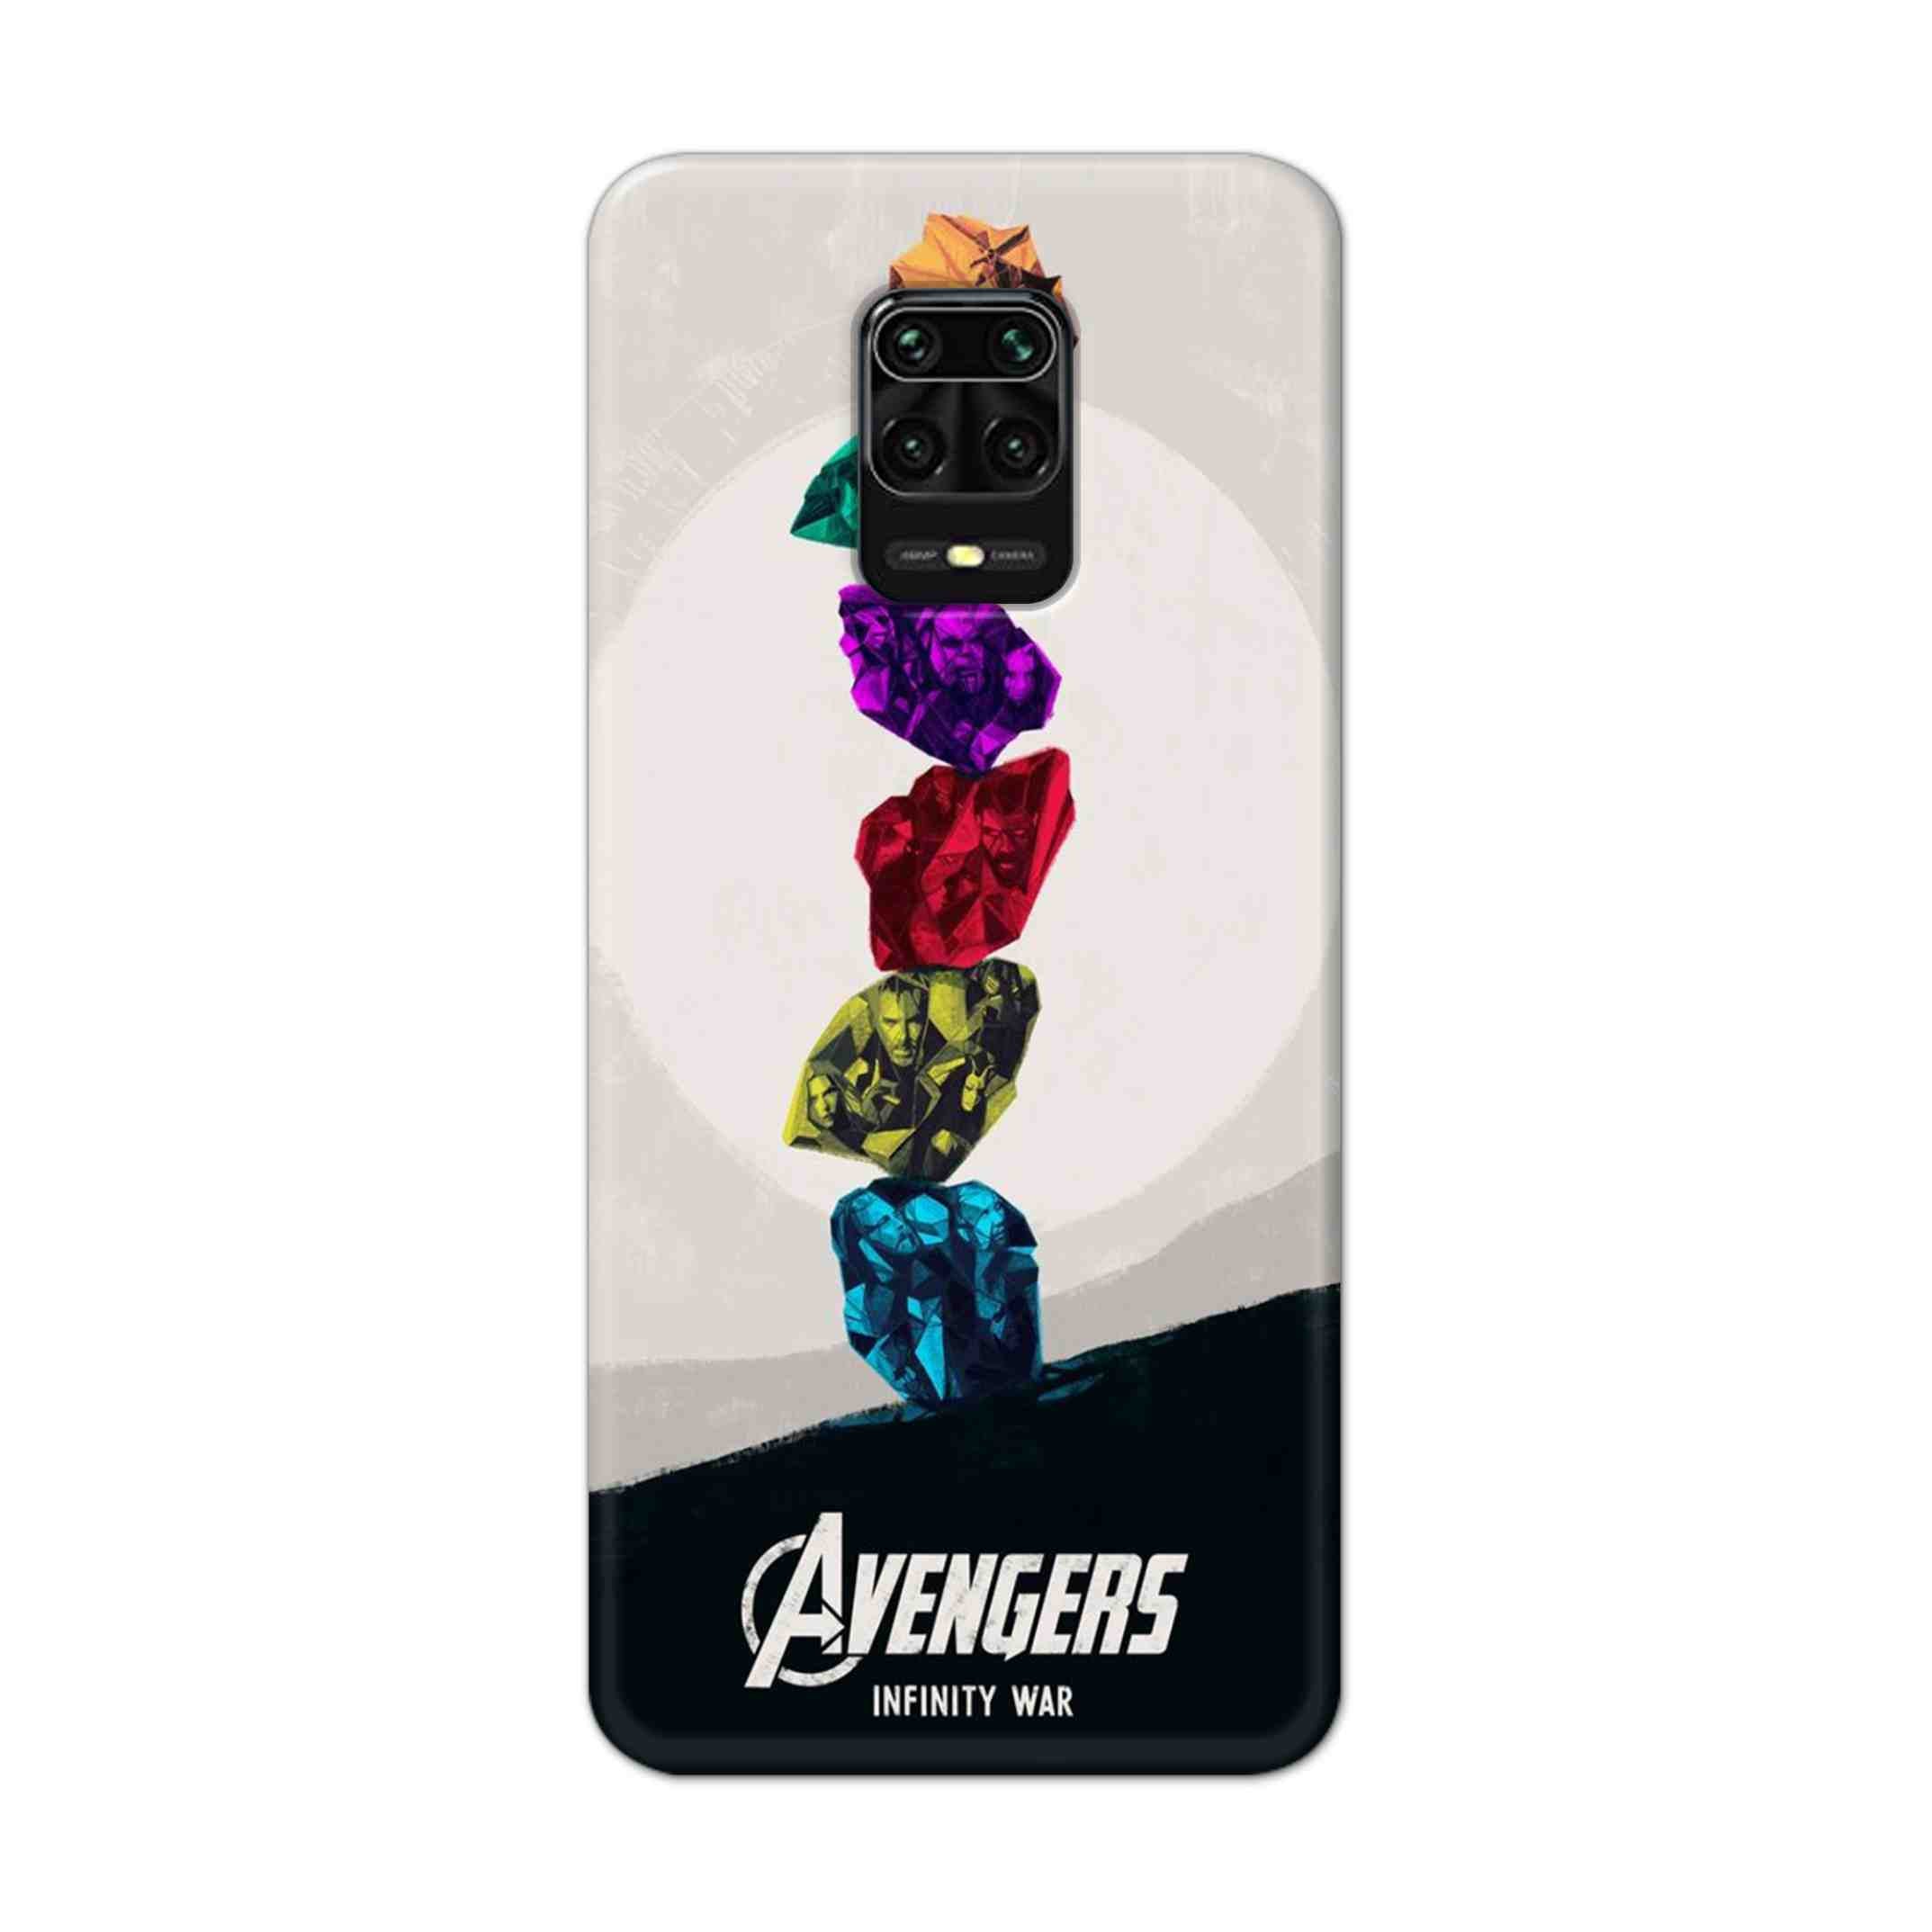 Buy Avengers Stone Hard Back Mobile Phone Case Cover For Redmi Note 9 Pro Online